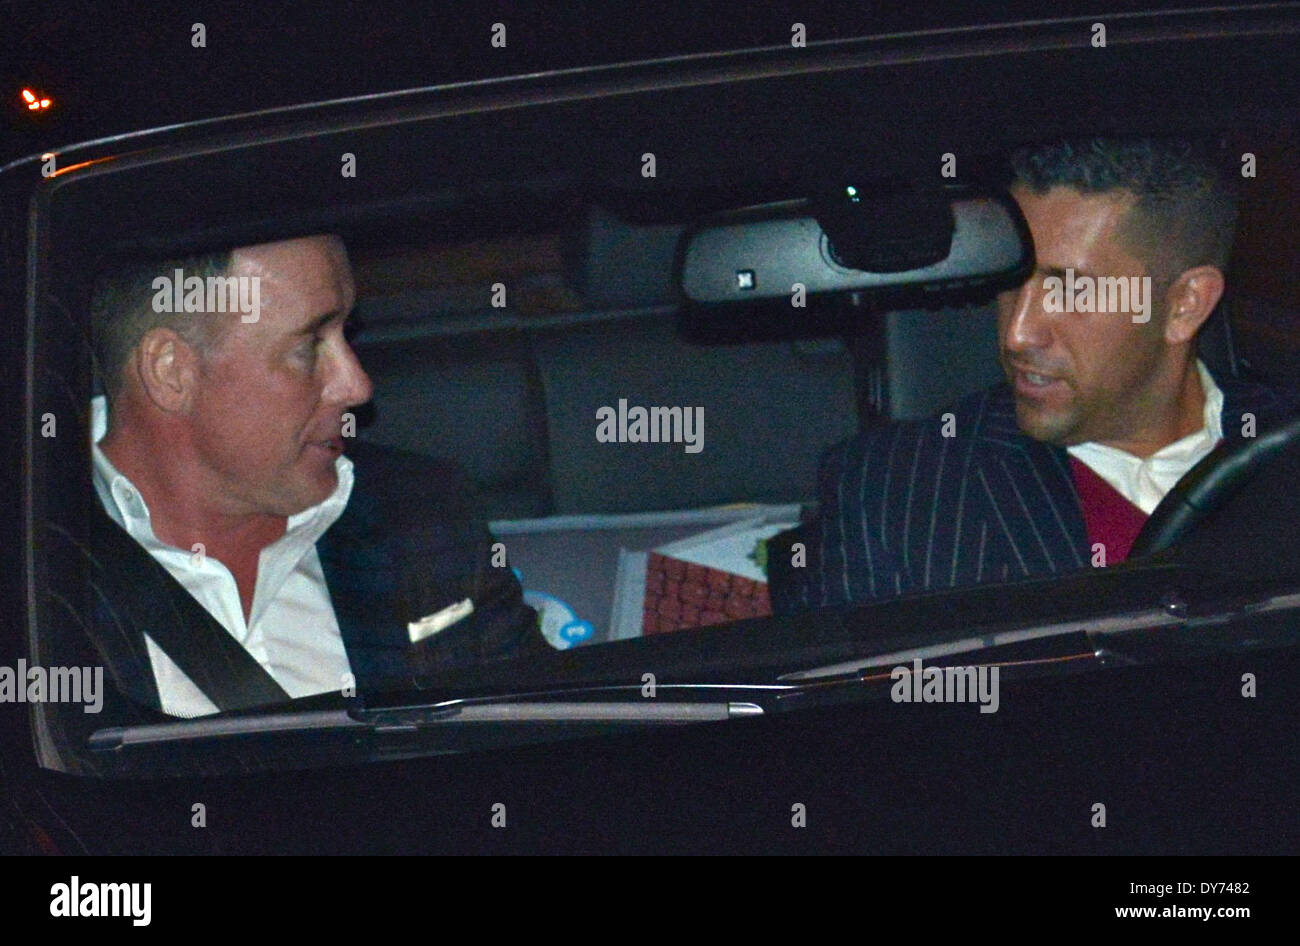 David Furnish leaves BOA Steakhouse with a friend Featuring: David Furnish Where: Los Angeles California United States When: 21 Dec 2012 Stock Photo